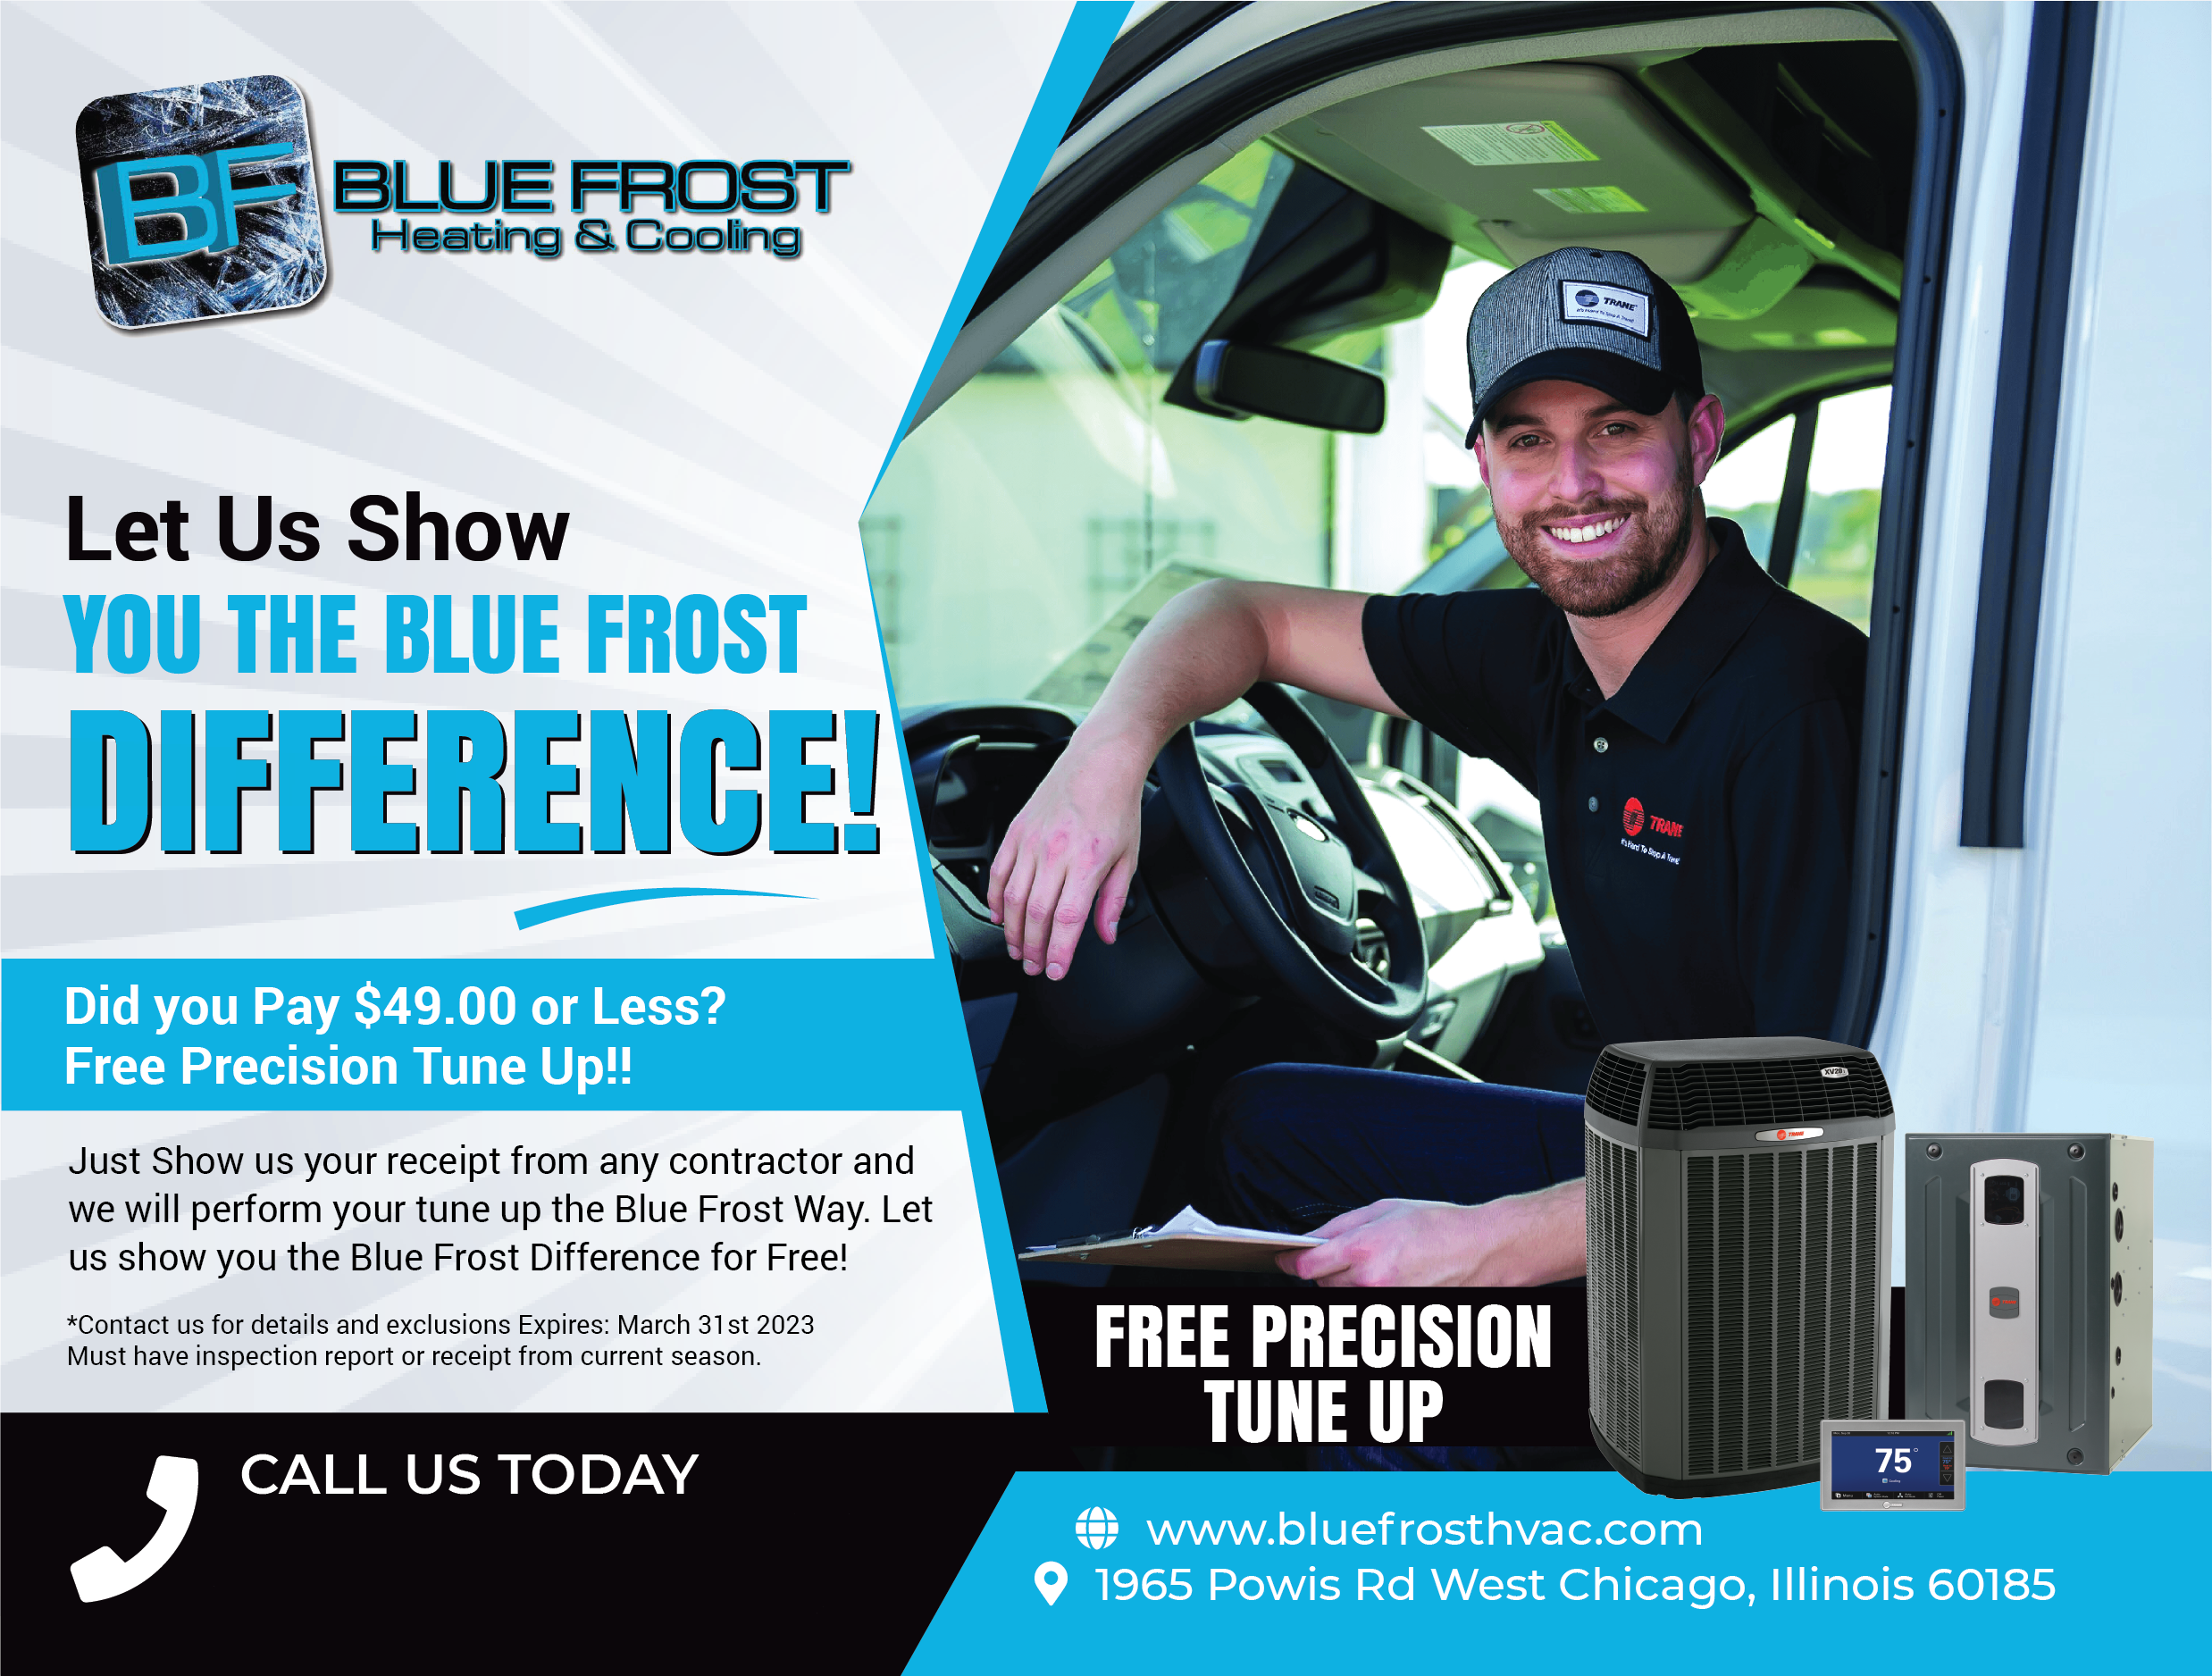 A promotion for free precision tune ups with the Blue Frost Difference